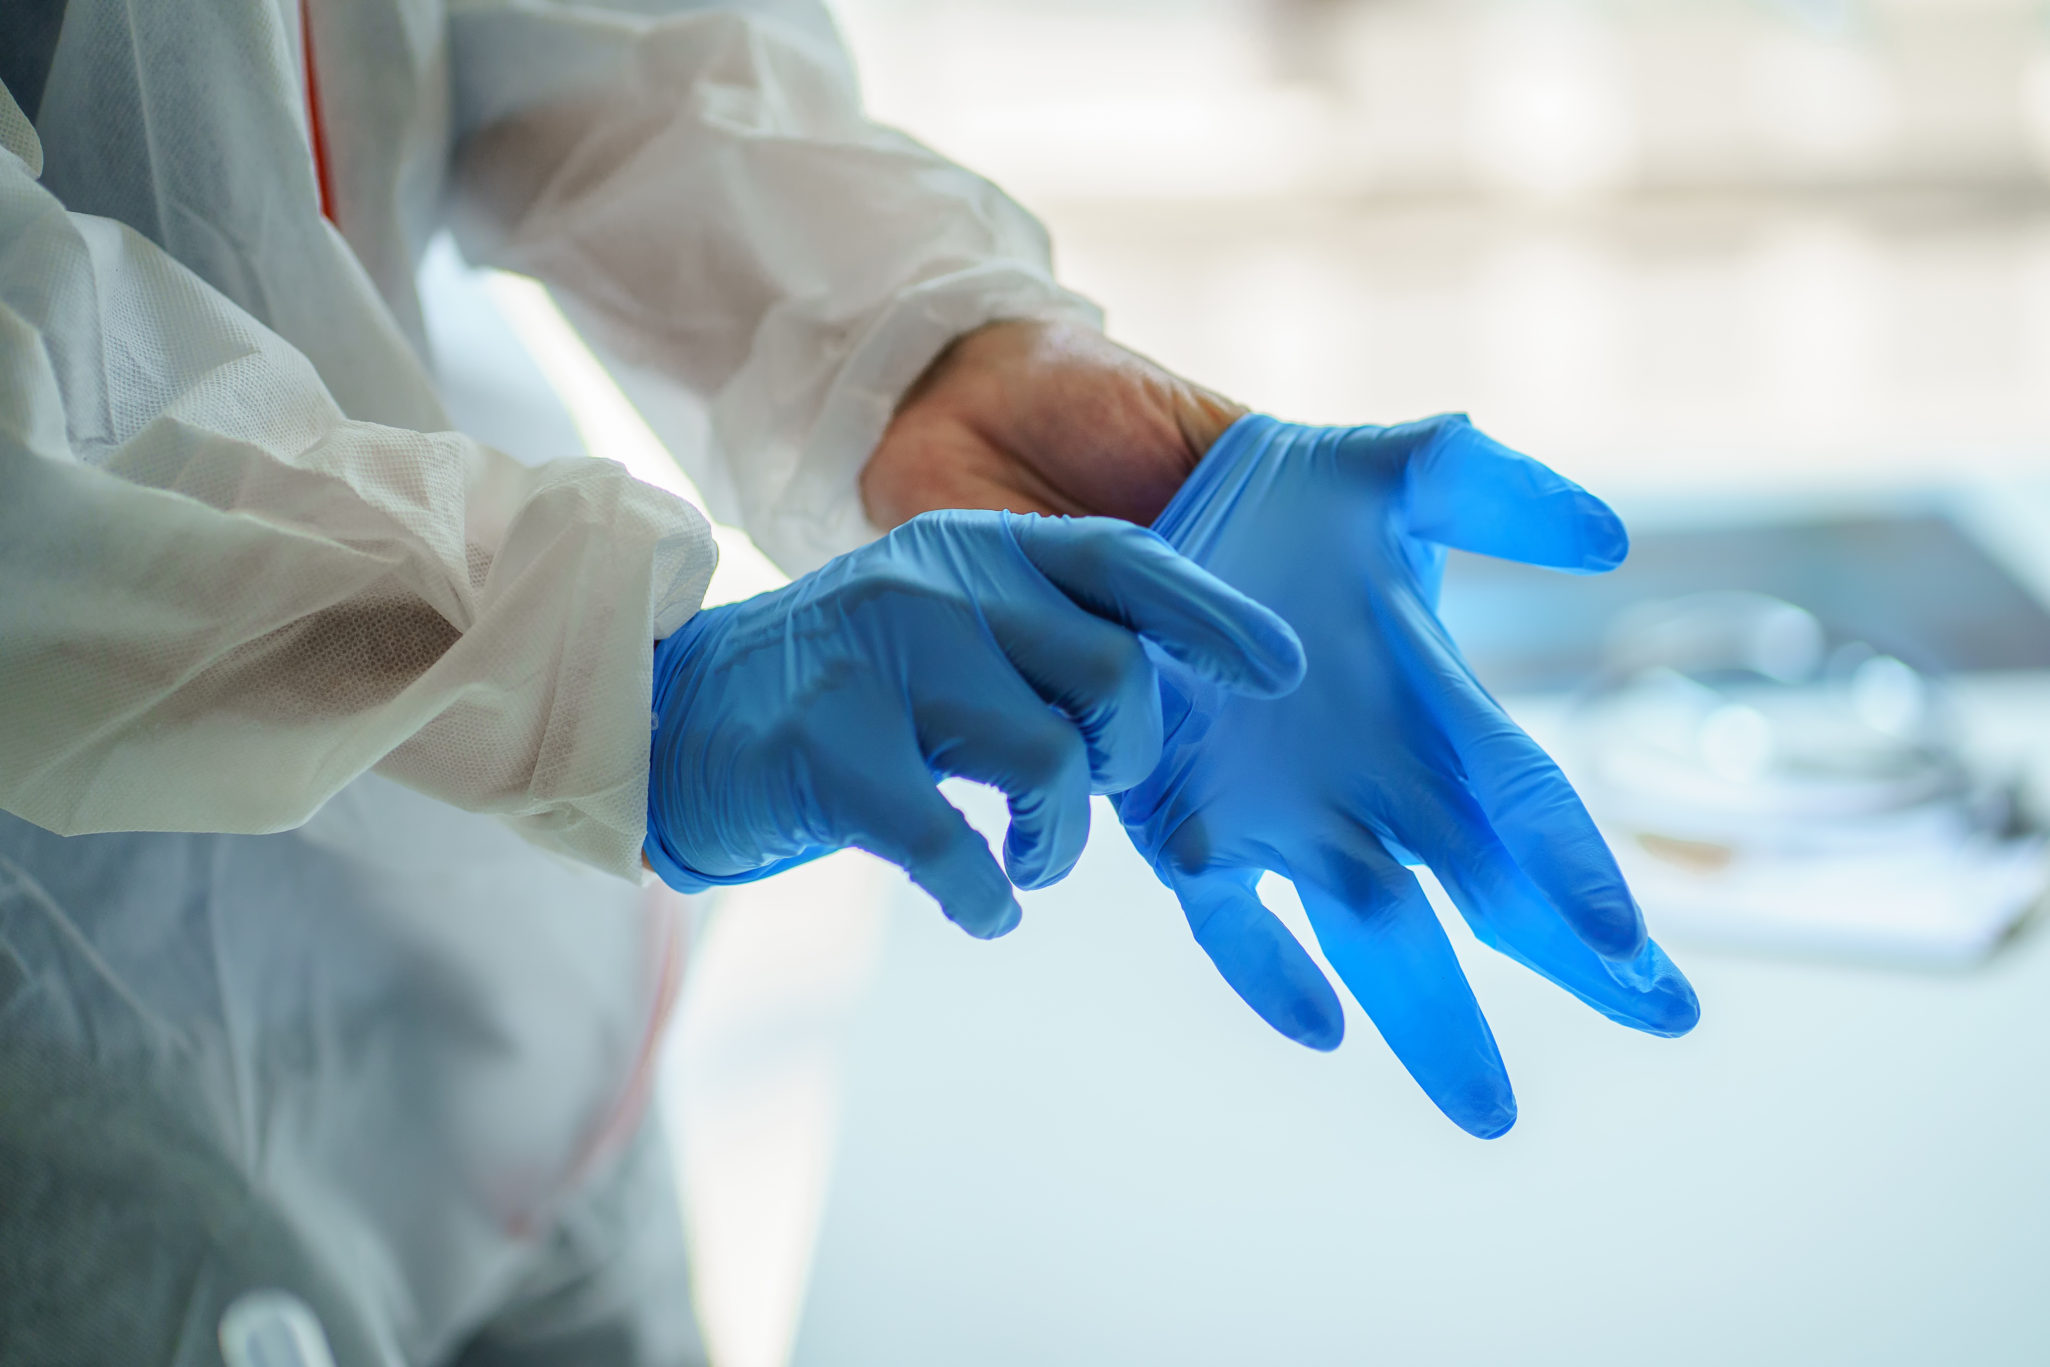 a healthcare worker putting on medical gloves for protection